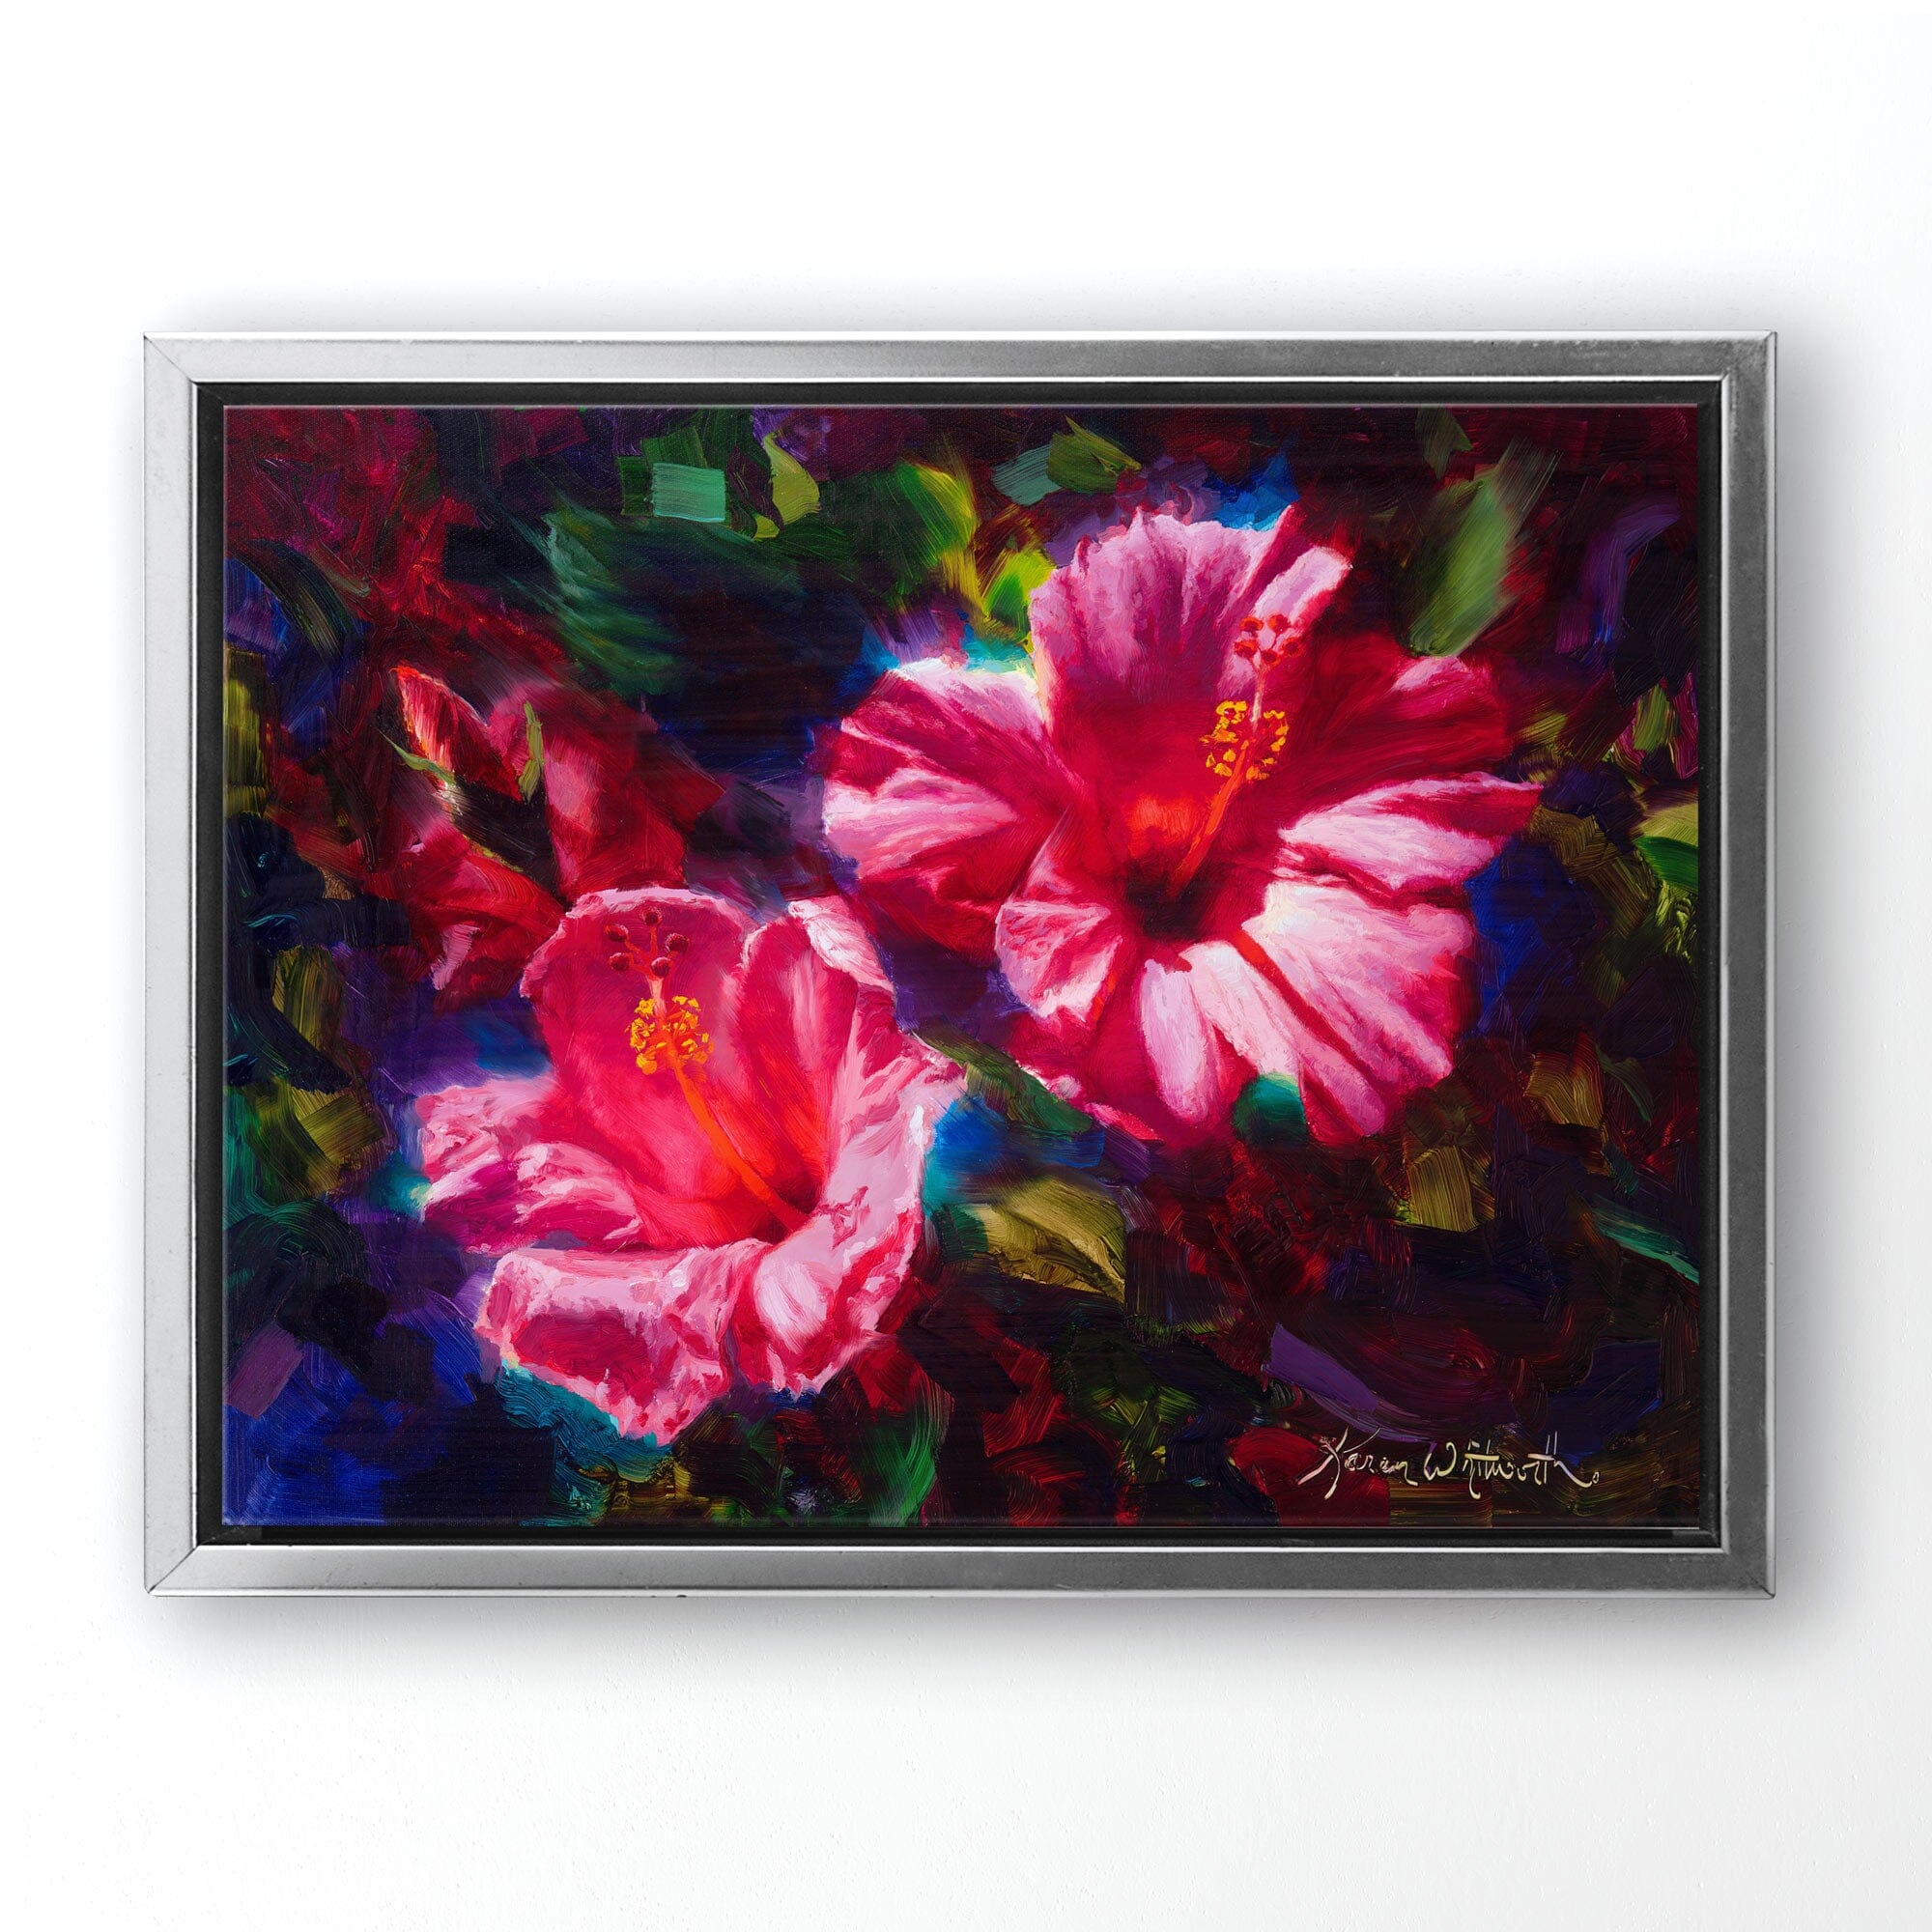 pink hibiscus Hawaiian flower painting on canvas by Hawaii artist Karen Whitworth. The artwork is framed in a silver frame and hanging on a white wall.